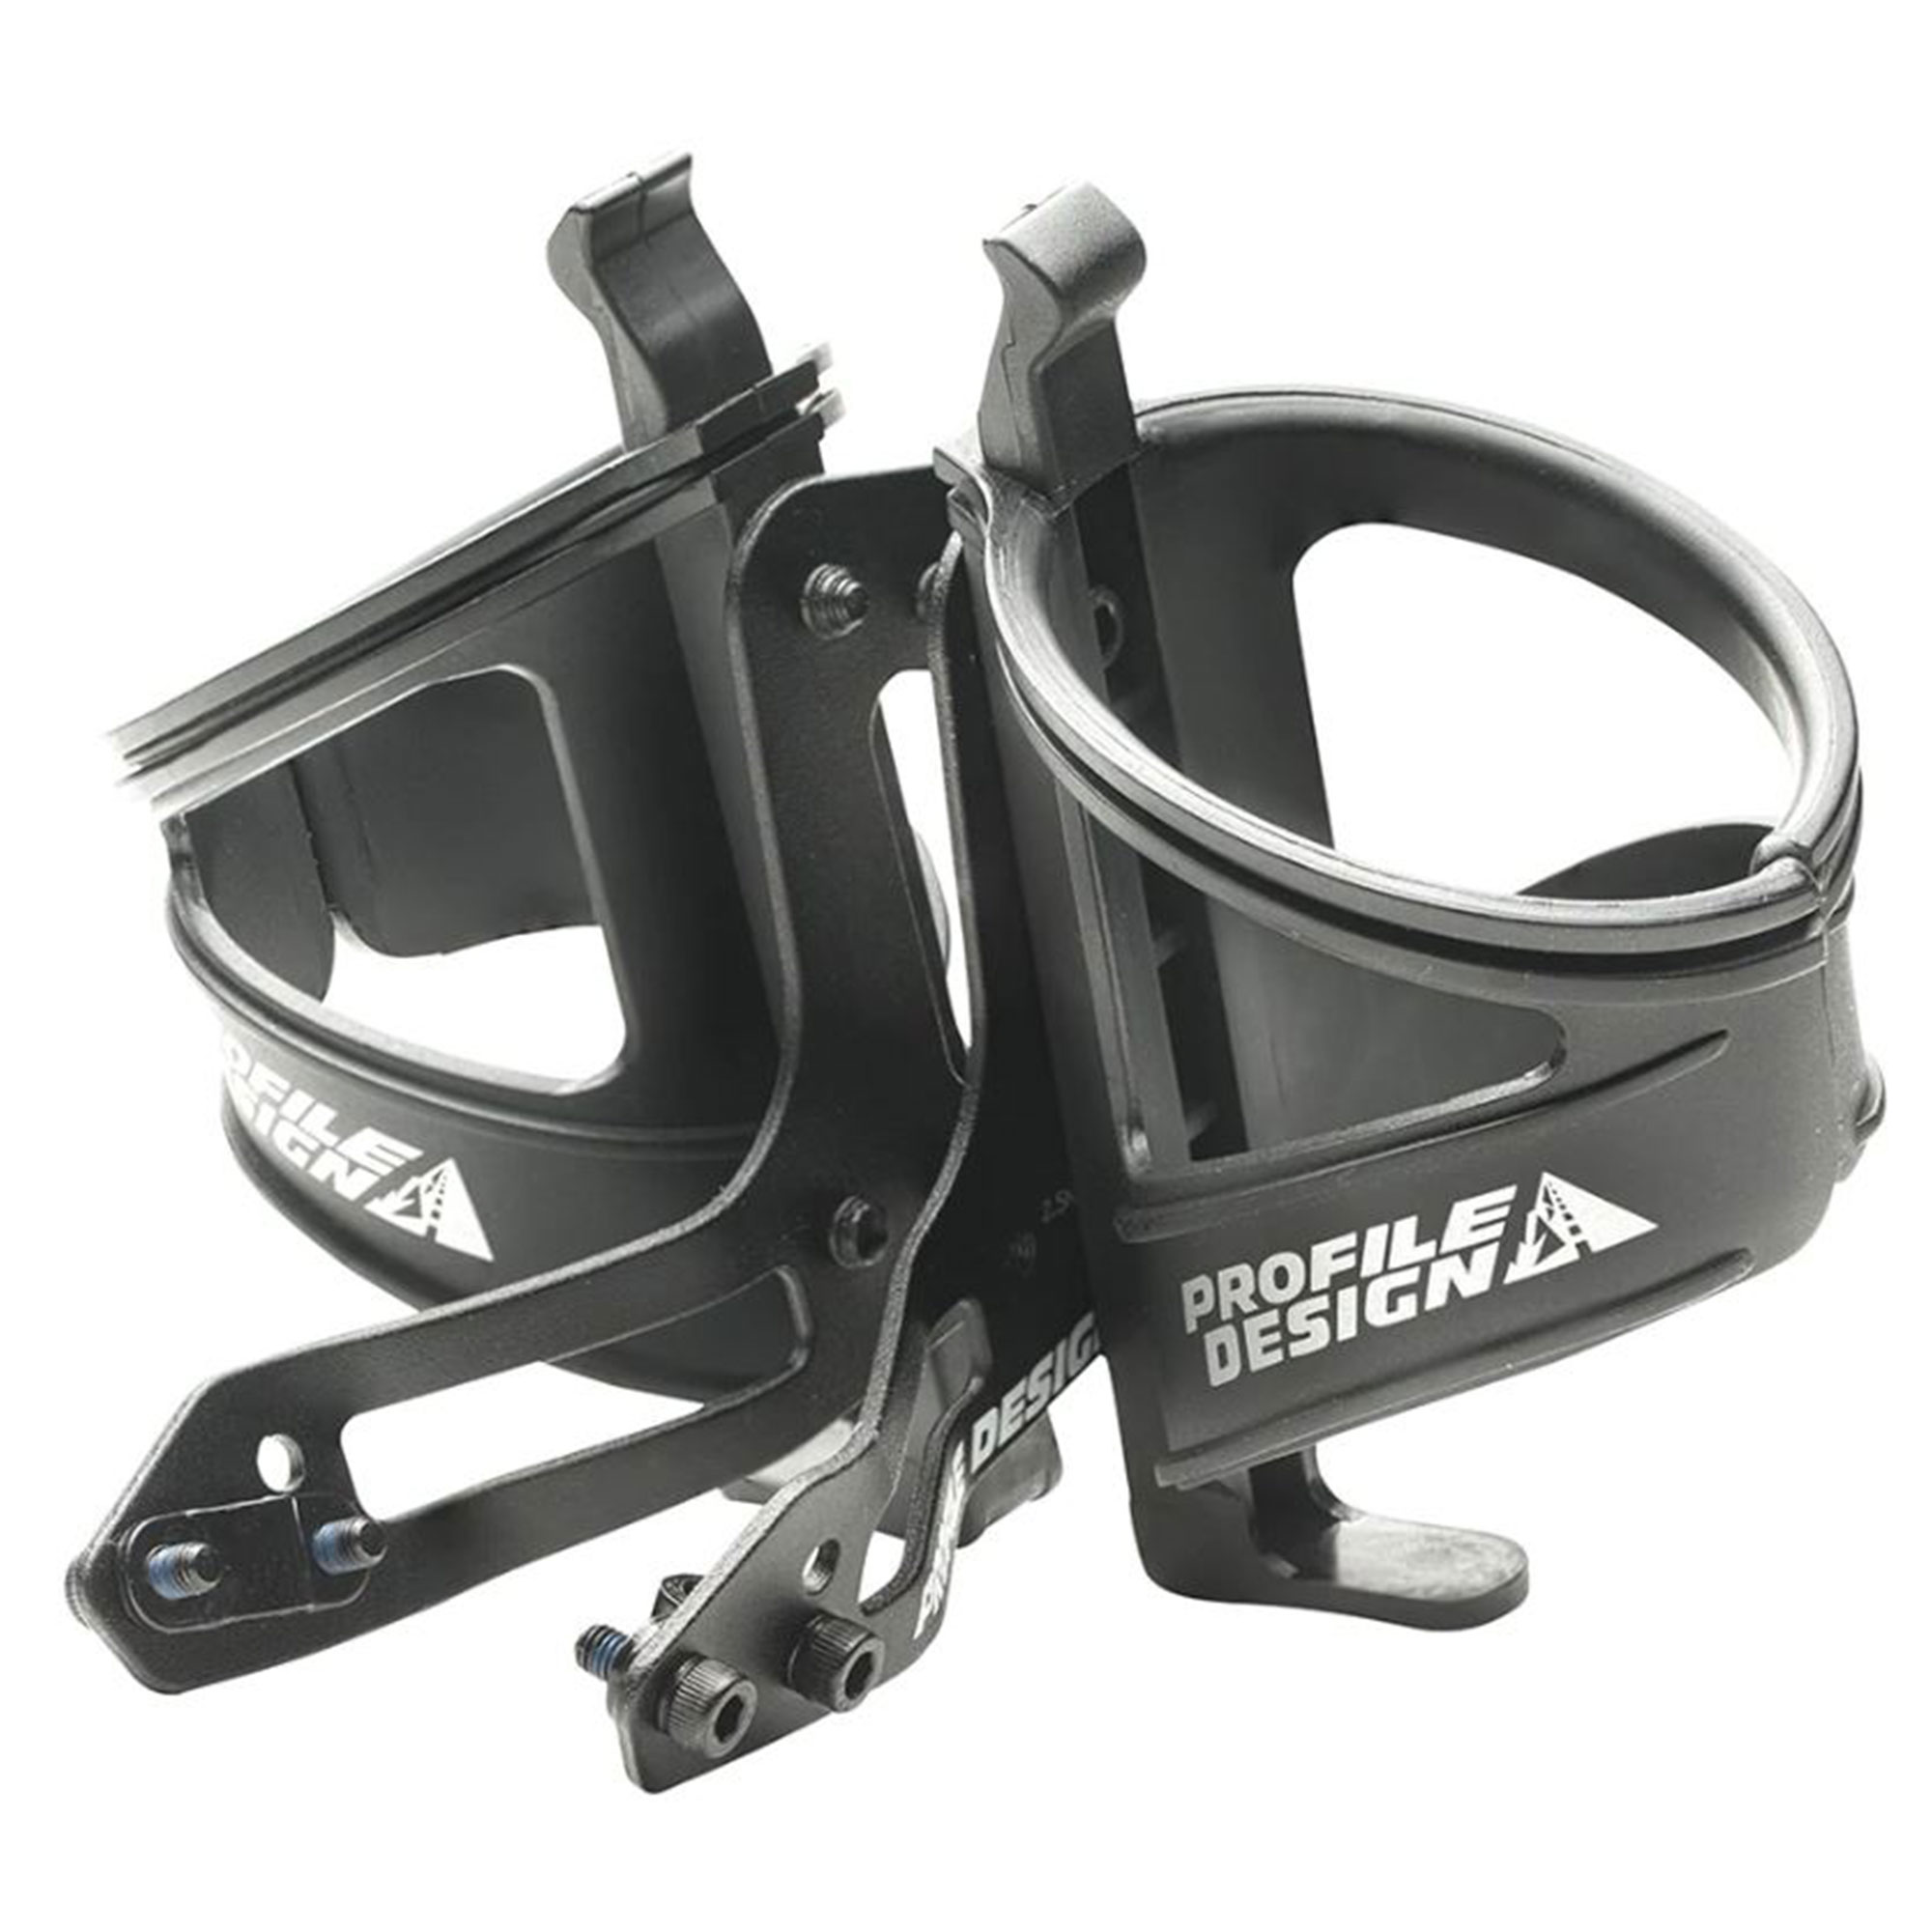 Profile Design RML Rear Mount Dual Bottle Cage Bicycle Hydration System - image 2 of 2